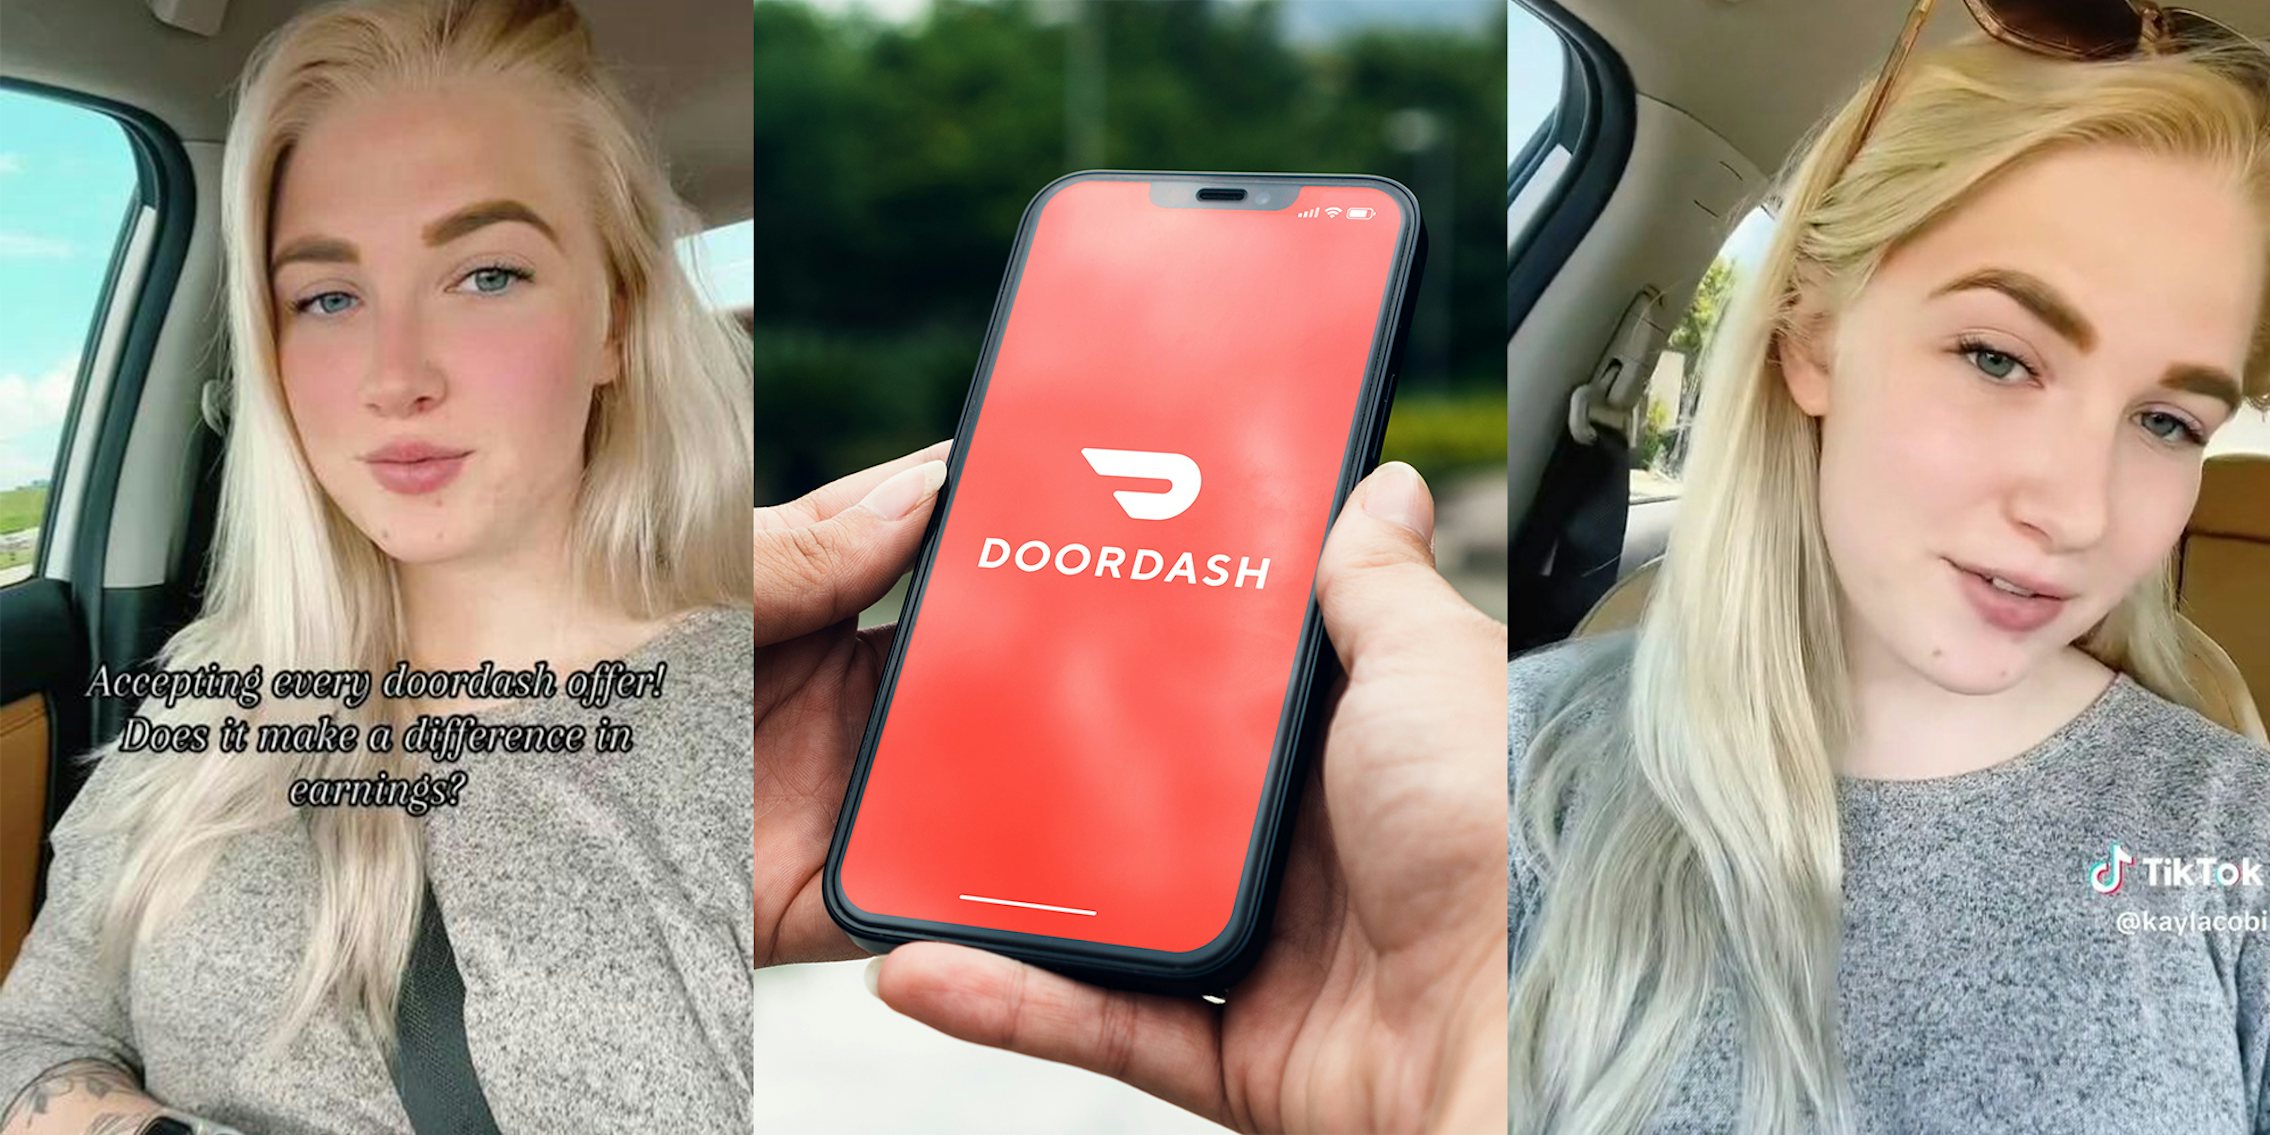 Girl wearing grey shirt in car; Girl in the park holding a smartphone with Doordash delivery app on the screen